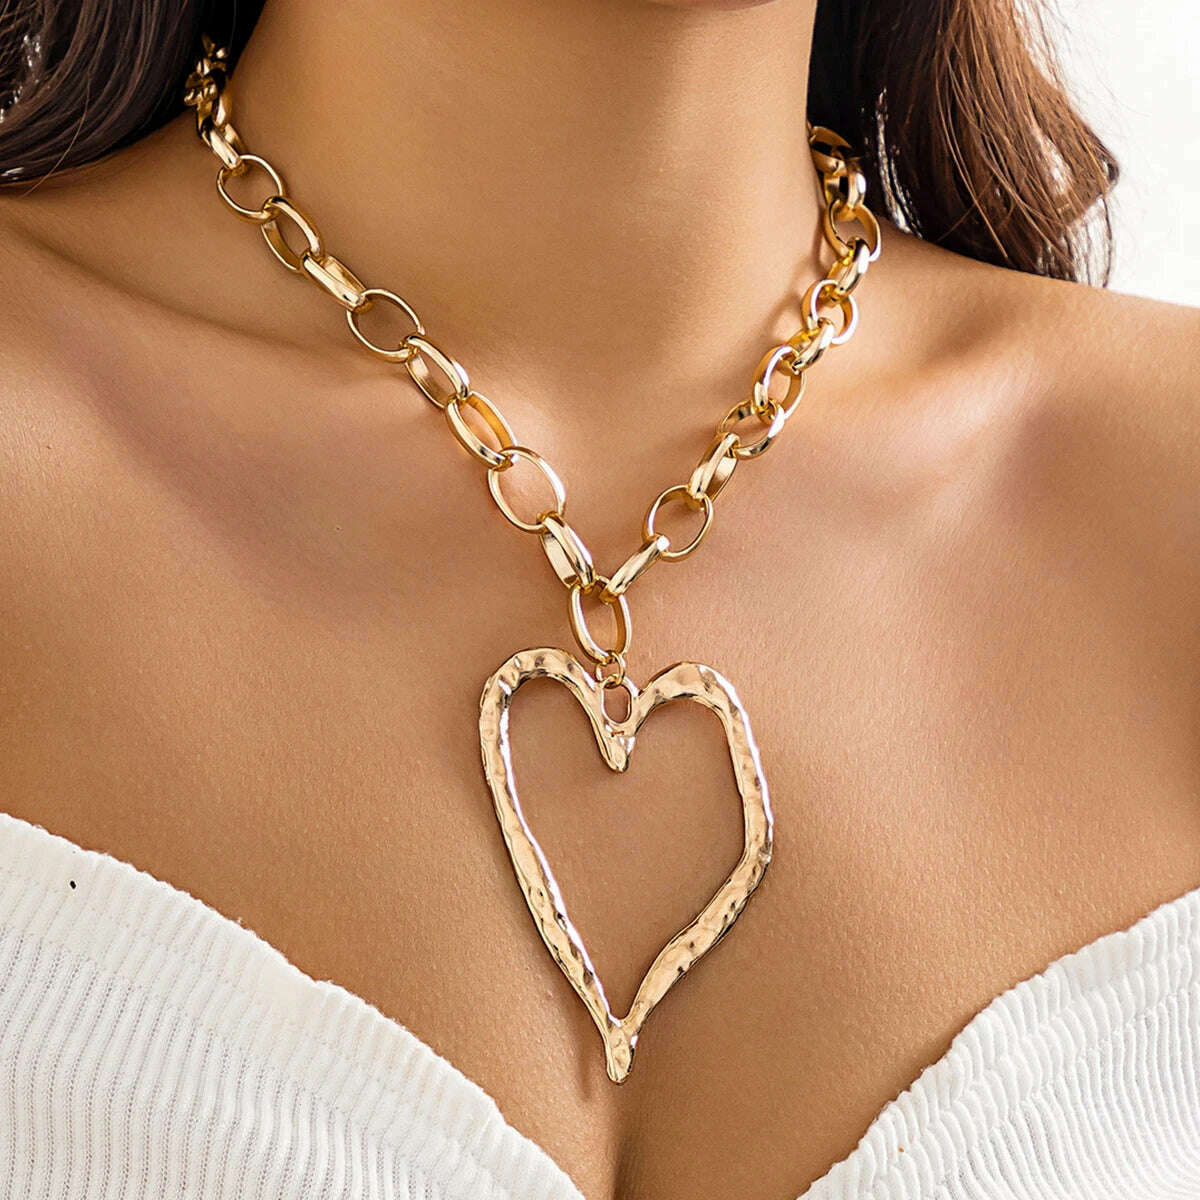 KIMLUD, Ingemark Exaggerated Unique Big Love Heart Pendant Choker Necklace for Women Chunky Heavy Chain Grunge Jewelry Steampunk Men New, Gold Color, KIMLUD Womens Clothes